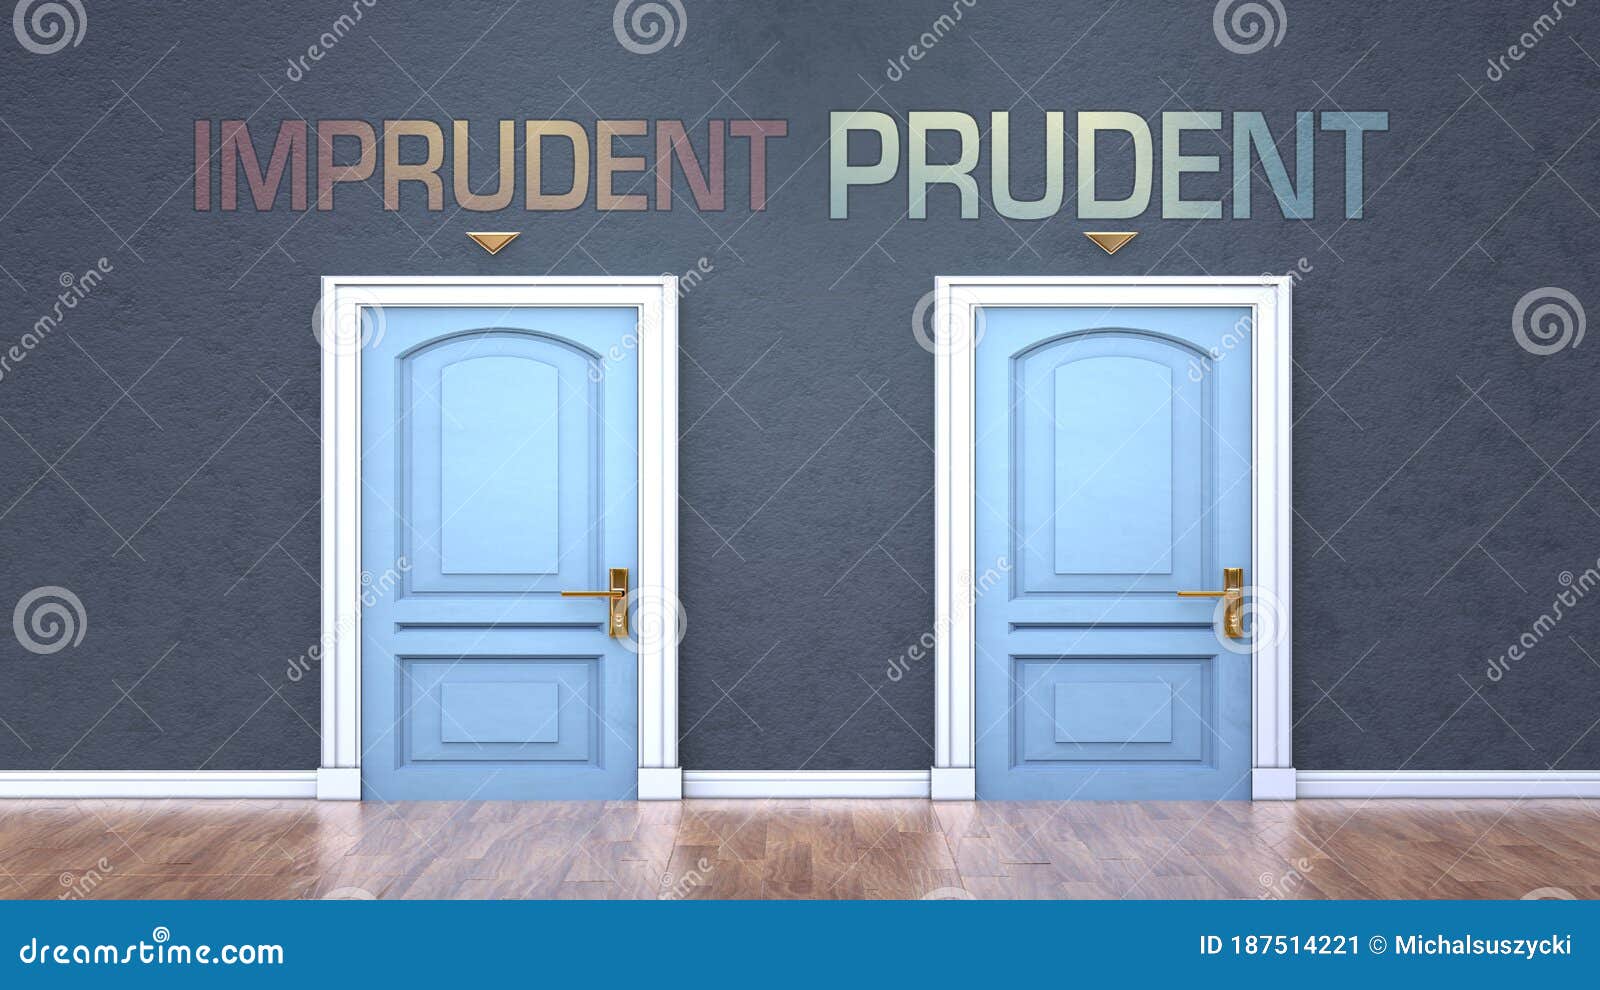 imprudent and prudent as a choice - pictured as words imprudent, prudent on doors to show that imprudent and prudent are opposite